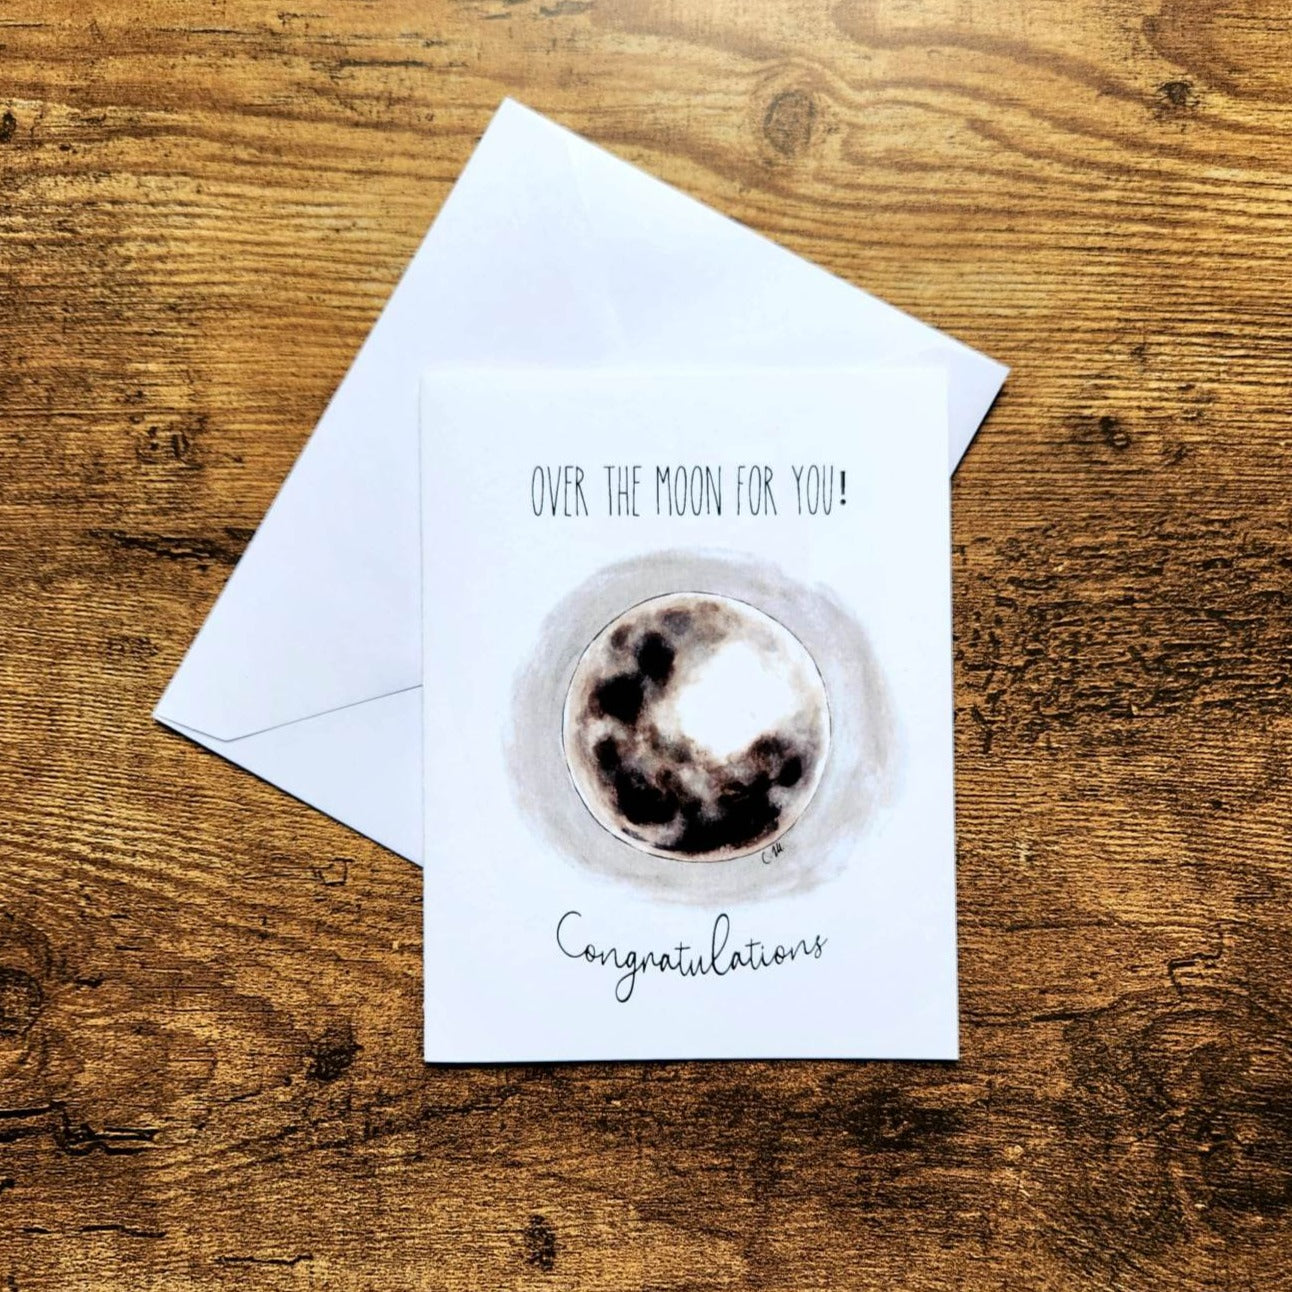 Over the moon for you congratulations, Moon nerd congratulatory card, New home, Engagement card, Wedding Card, New baby card, New dad card